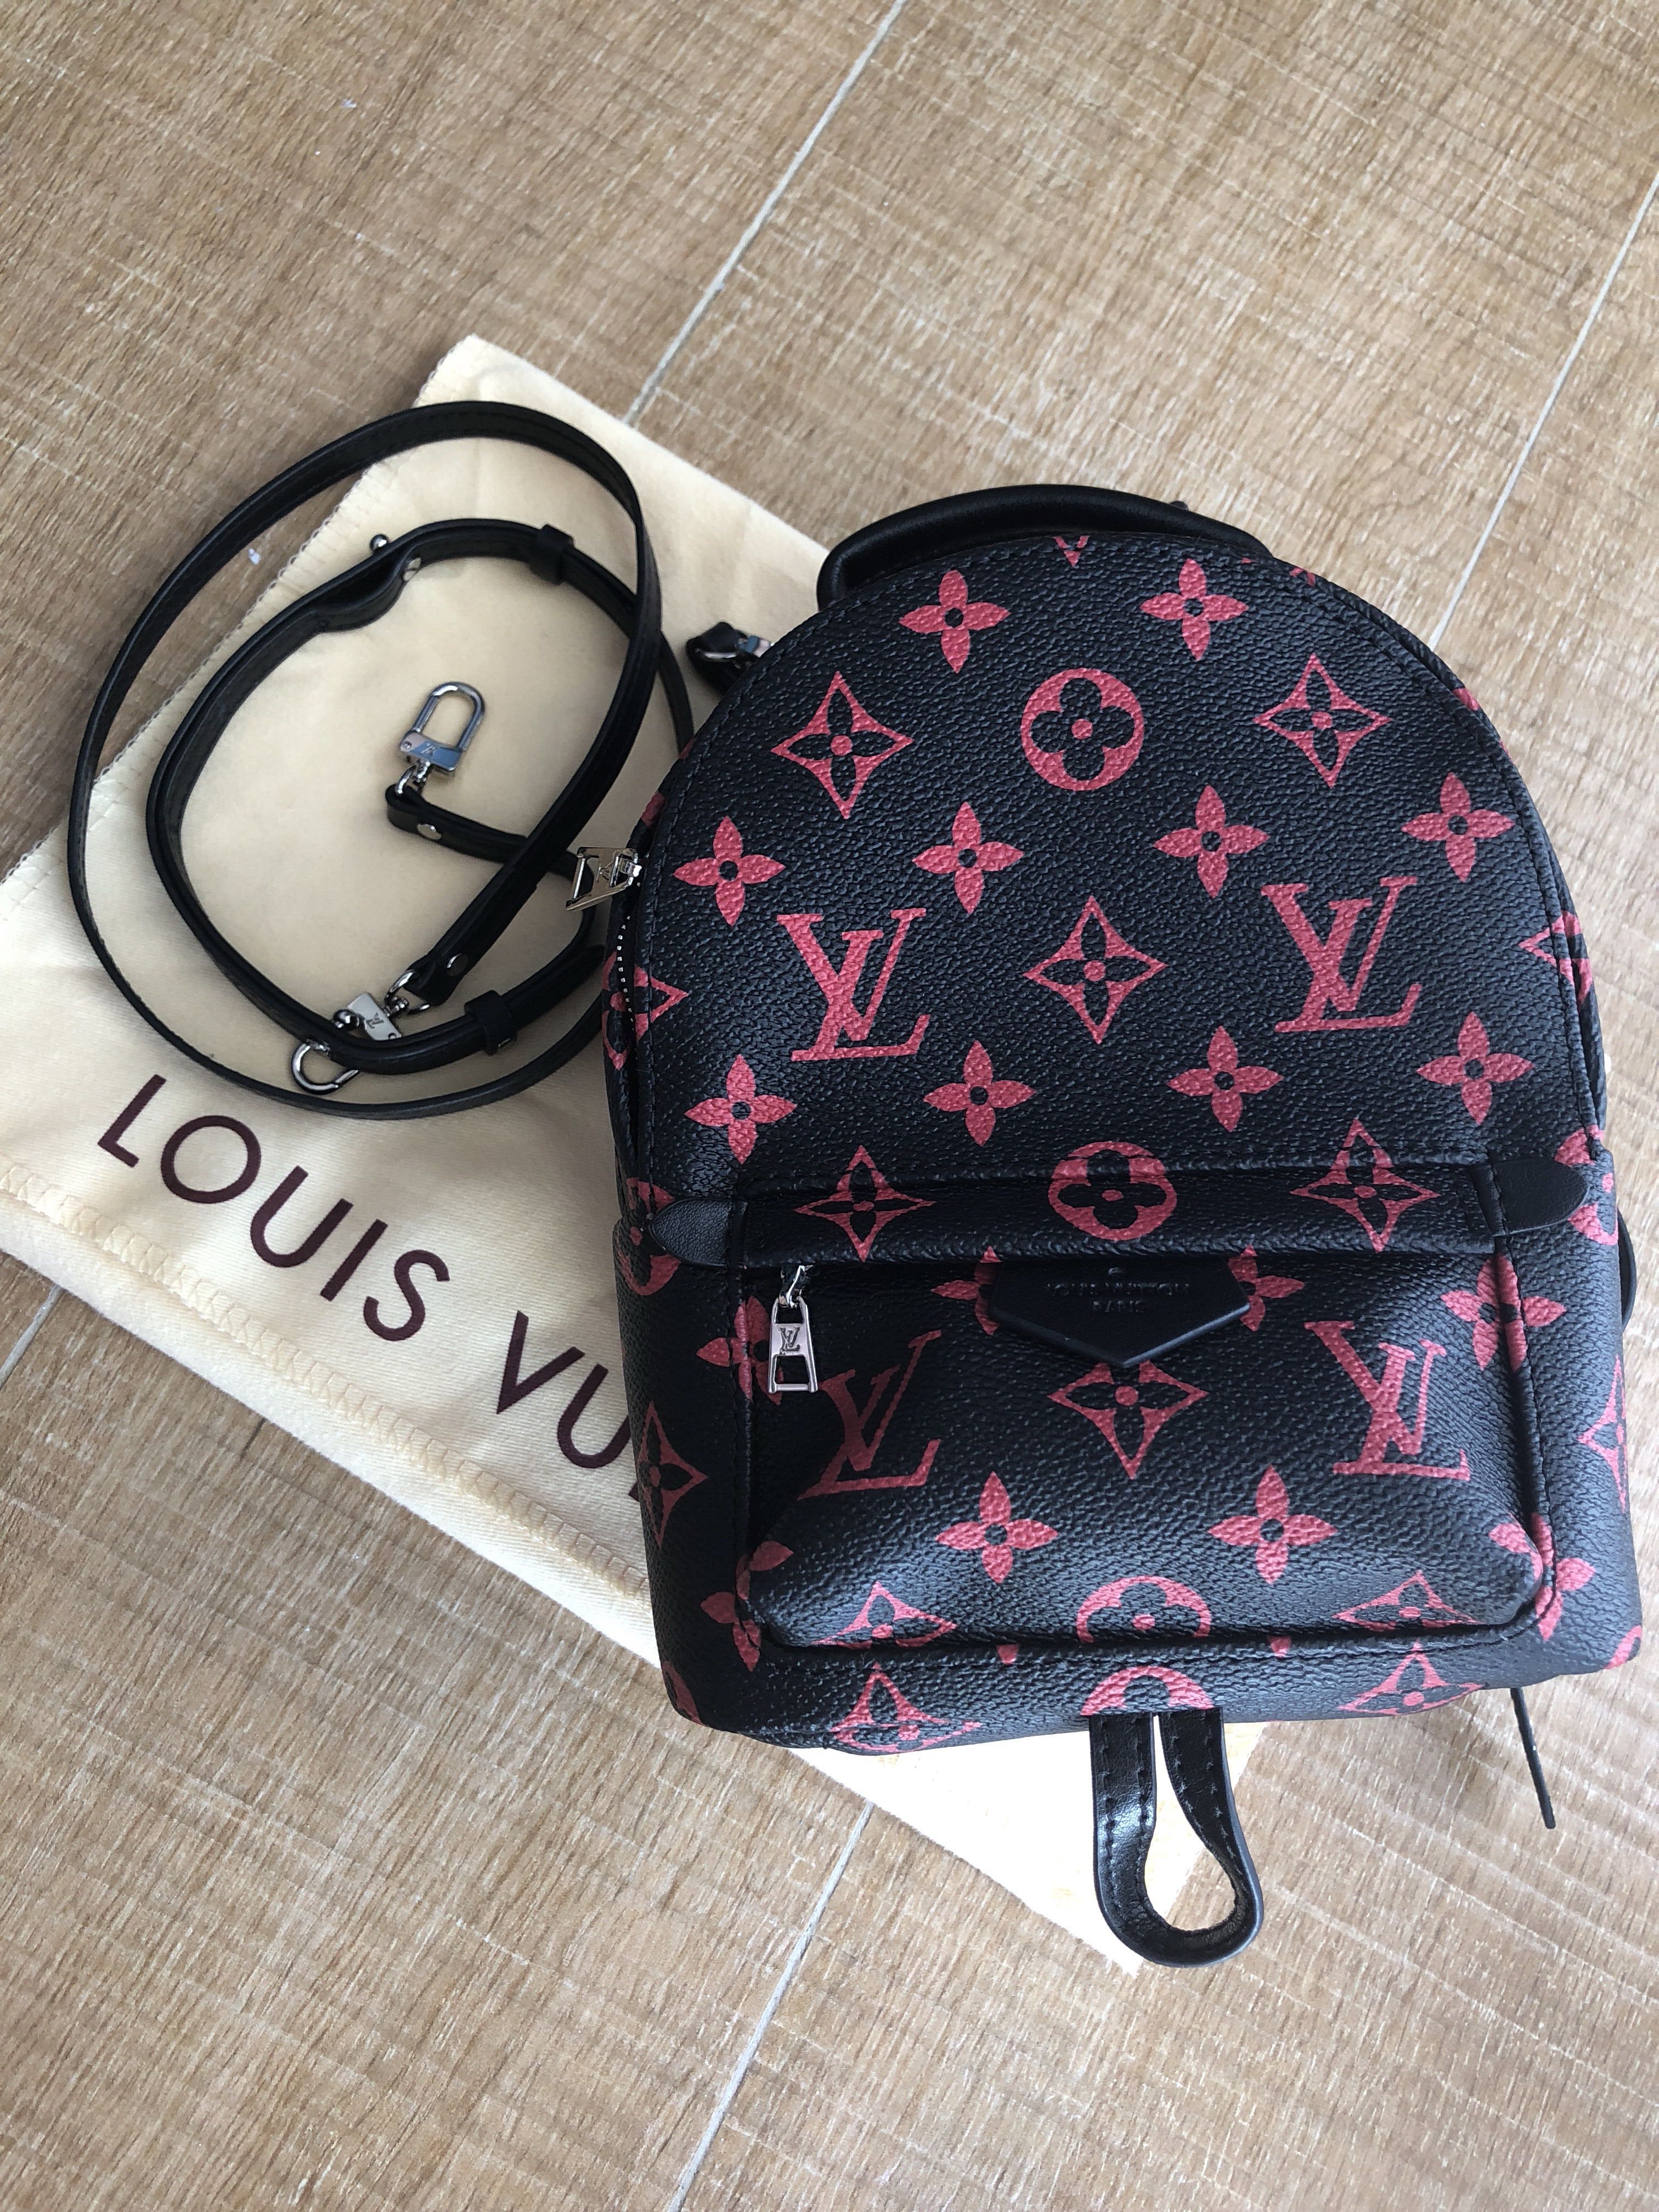 Louis Vuitton Mini Backpack Black And Red | Sante Blog